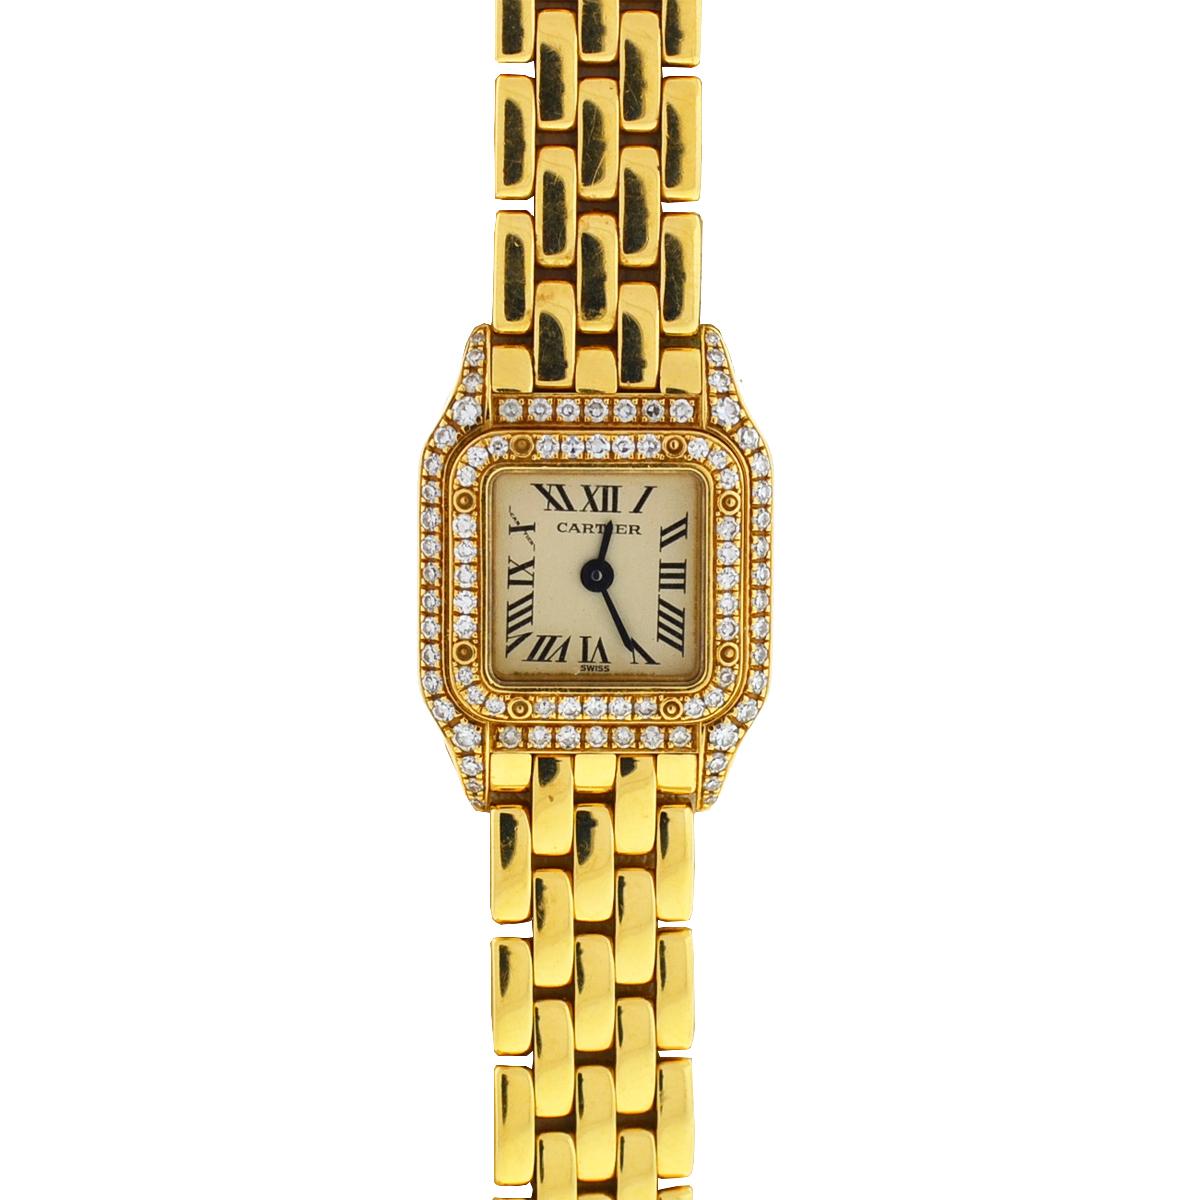 Company-Cartier
Style -Luxury Watch
Model-Mini Panthere Factory Diamonds
Reference Number01131
Case Metal-18k Yellow Gold
Weight -44.02 Grams
Case Measurement-17 mm
Bracelet-18k Yellow Gold
Dial-White- with roman numerals
Bezel-18k Yellow